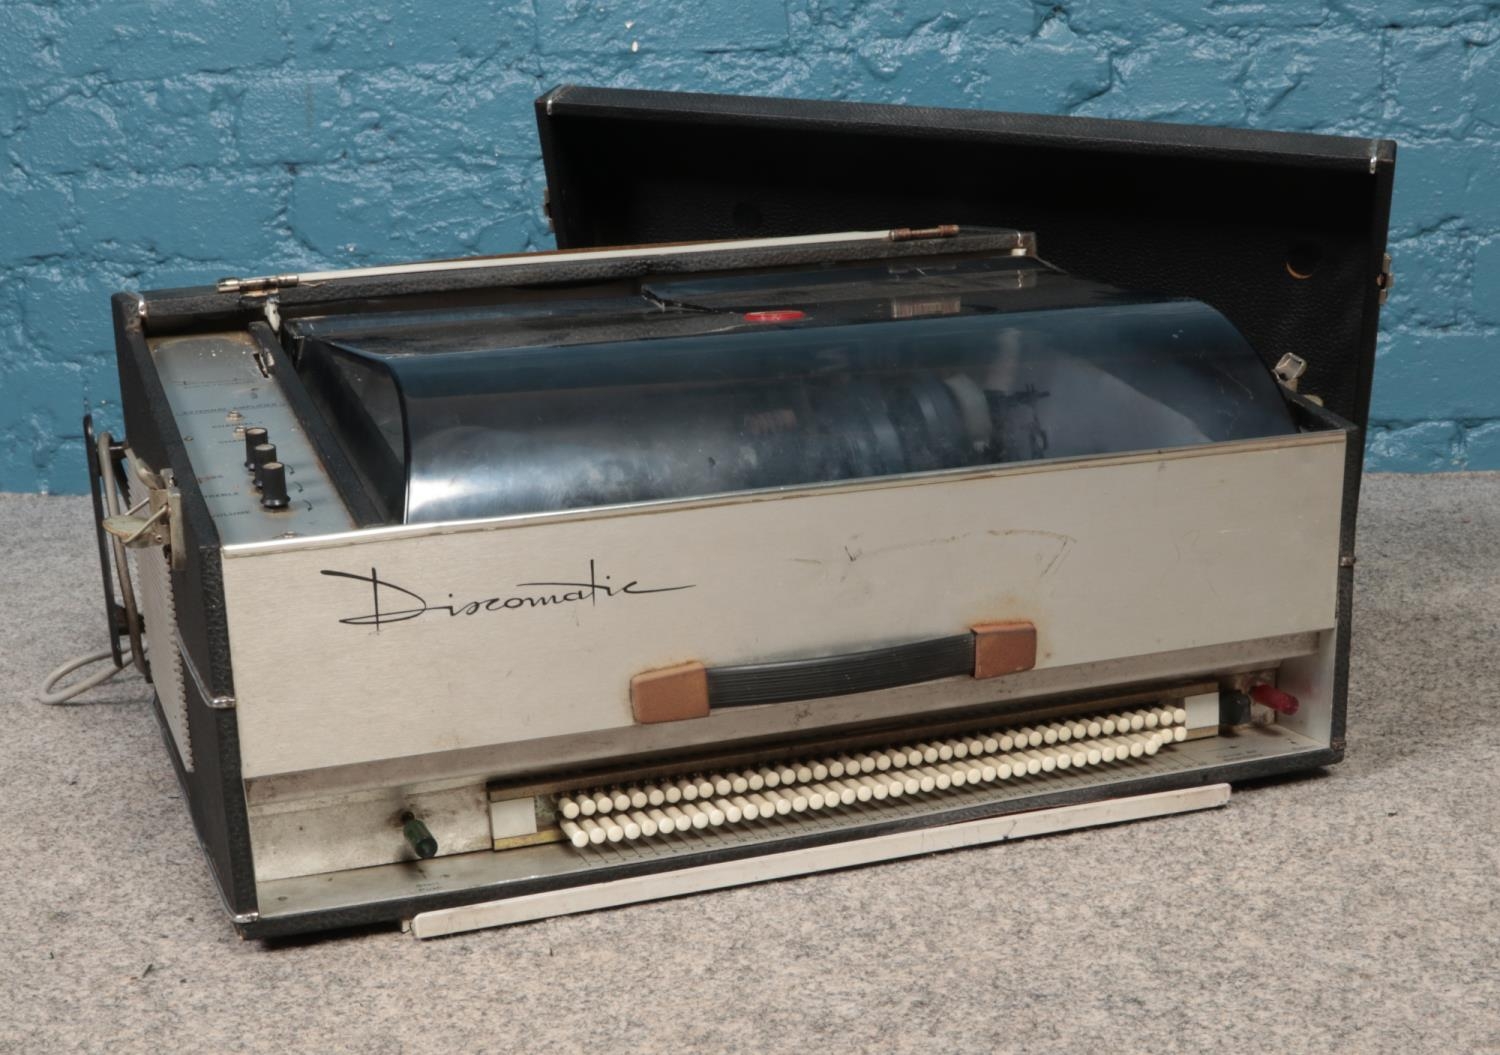 A Discomatic c1960's portable jukebox. Comes with facility to hold forty single vinyl records. - Image 2 of 2